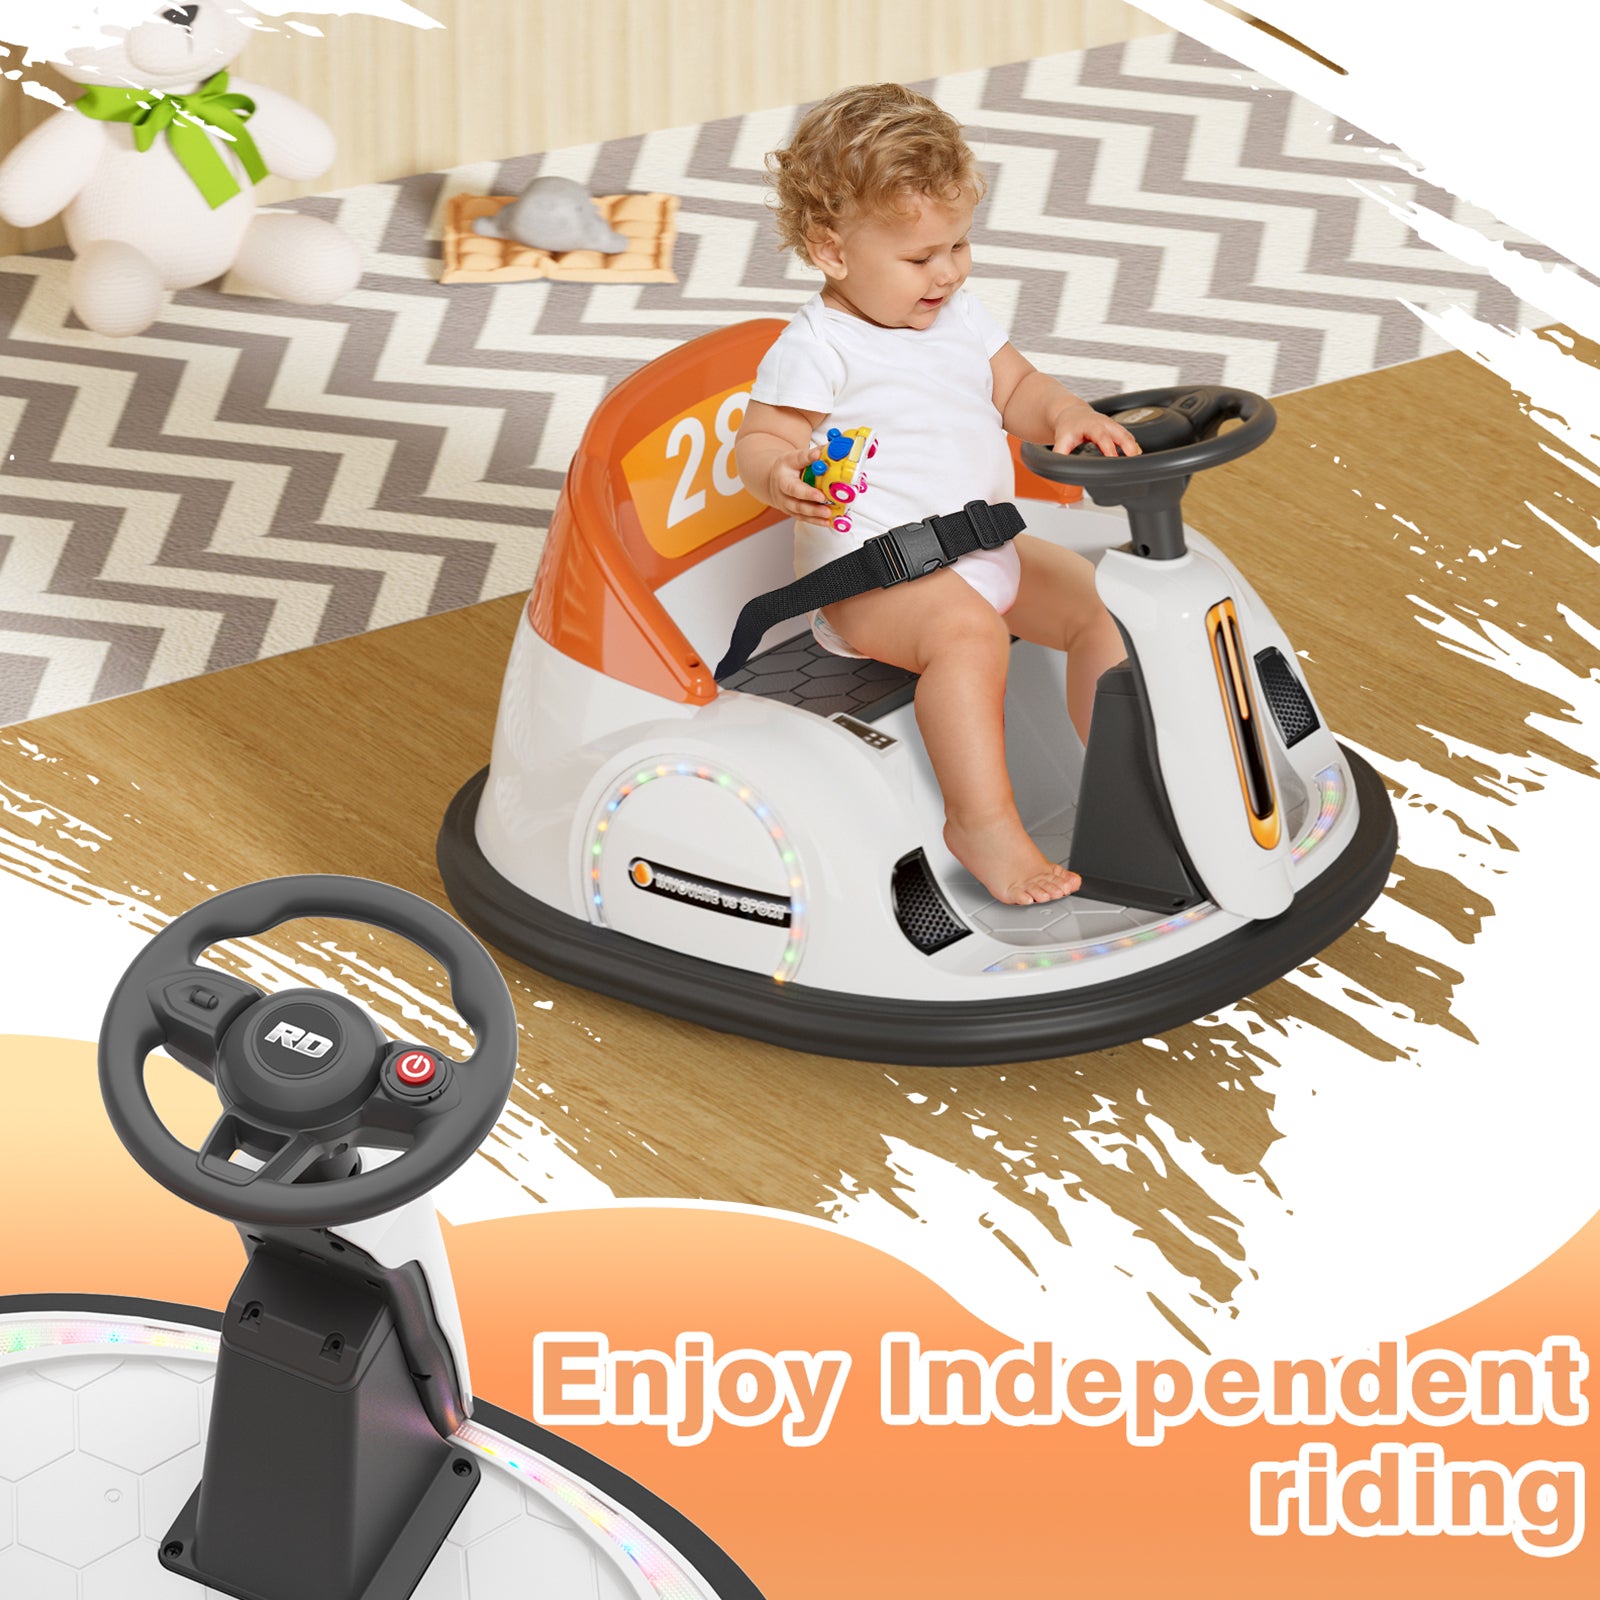 6V Electric Ride on Bumper Car Toys for Kids Toddlers 2-4 Years Old, 360° Spinning Bumping Toy Gifts Cars, Music Play, Lights, 0-2 mph, Orange